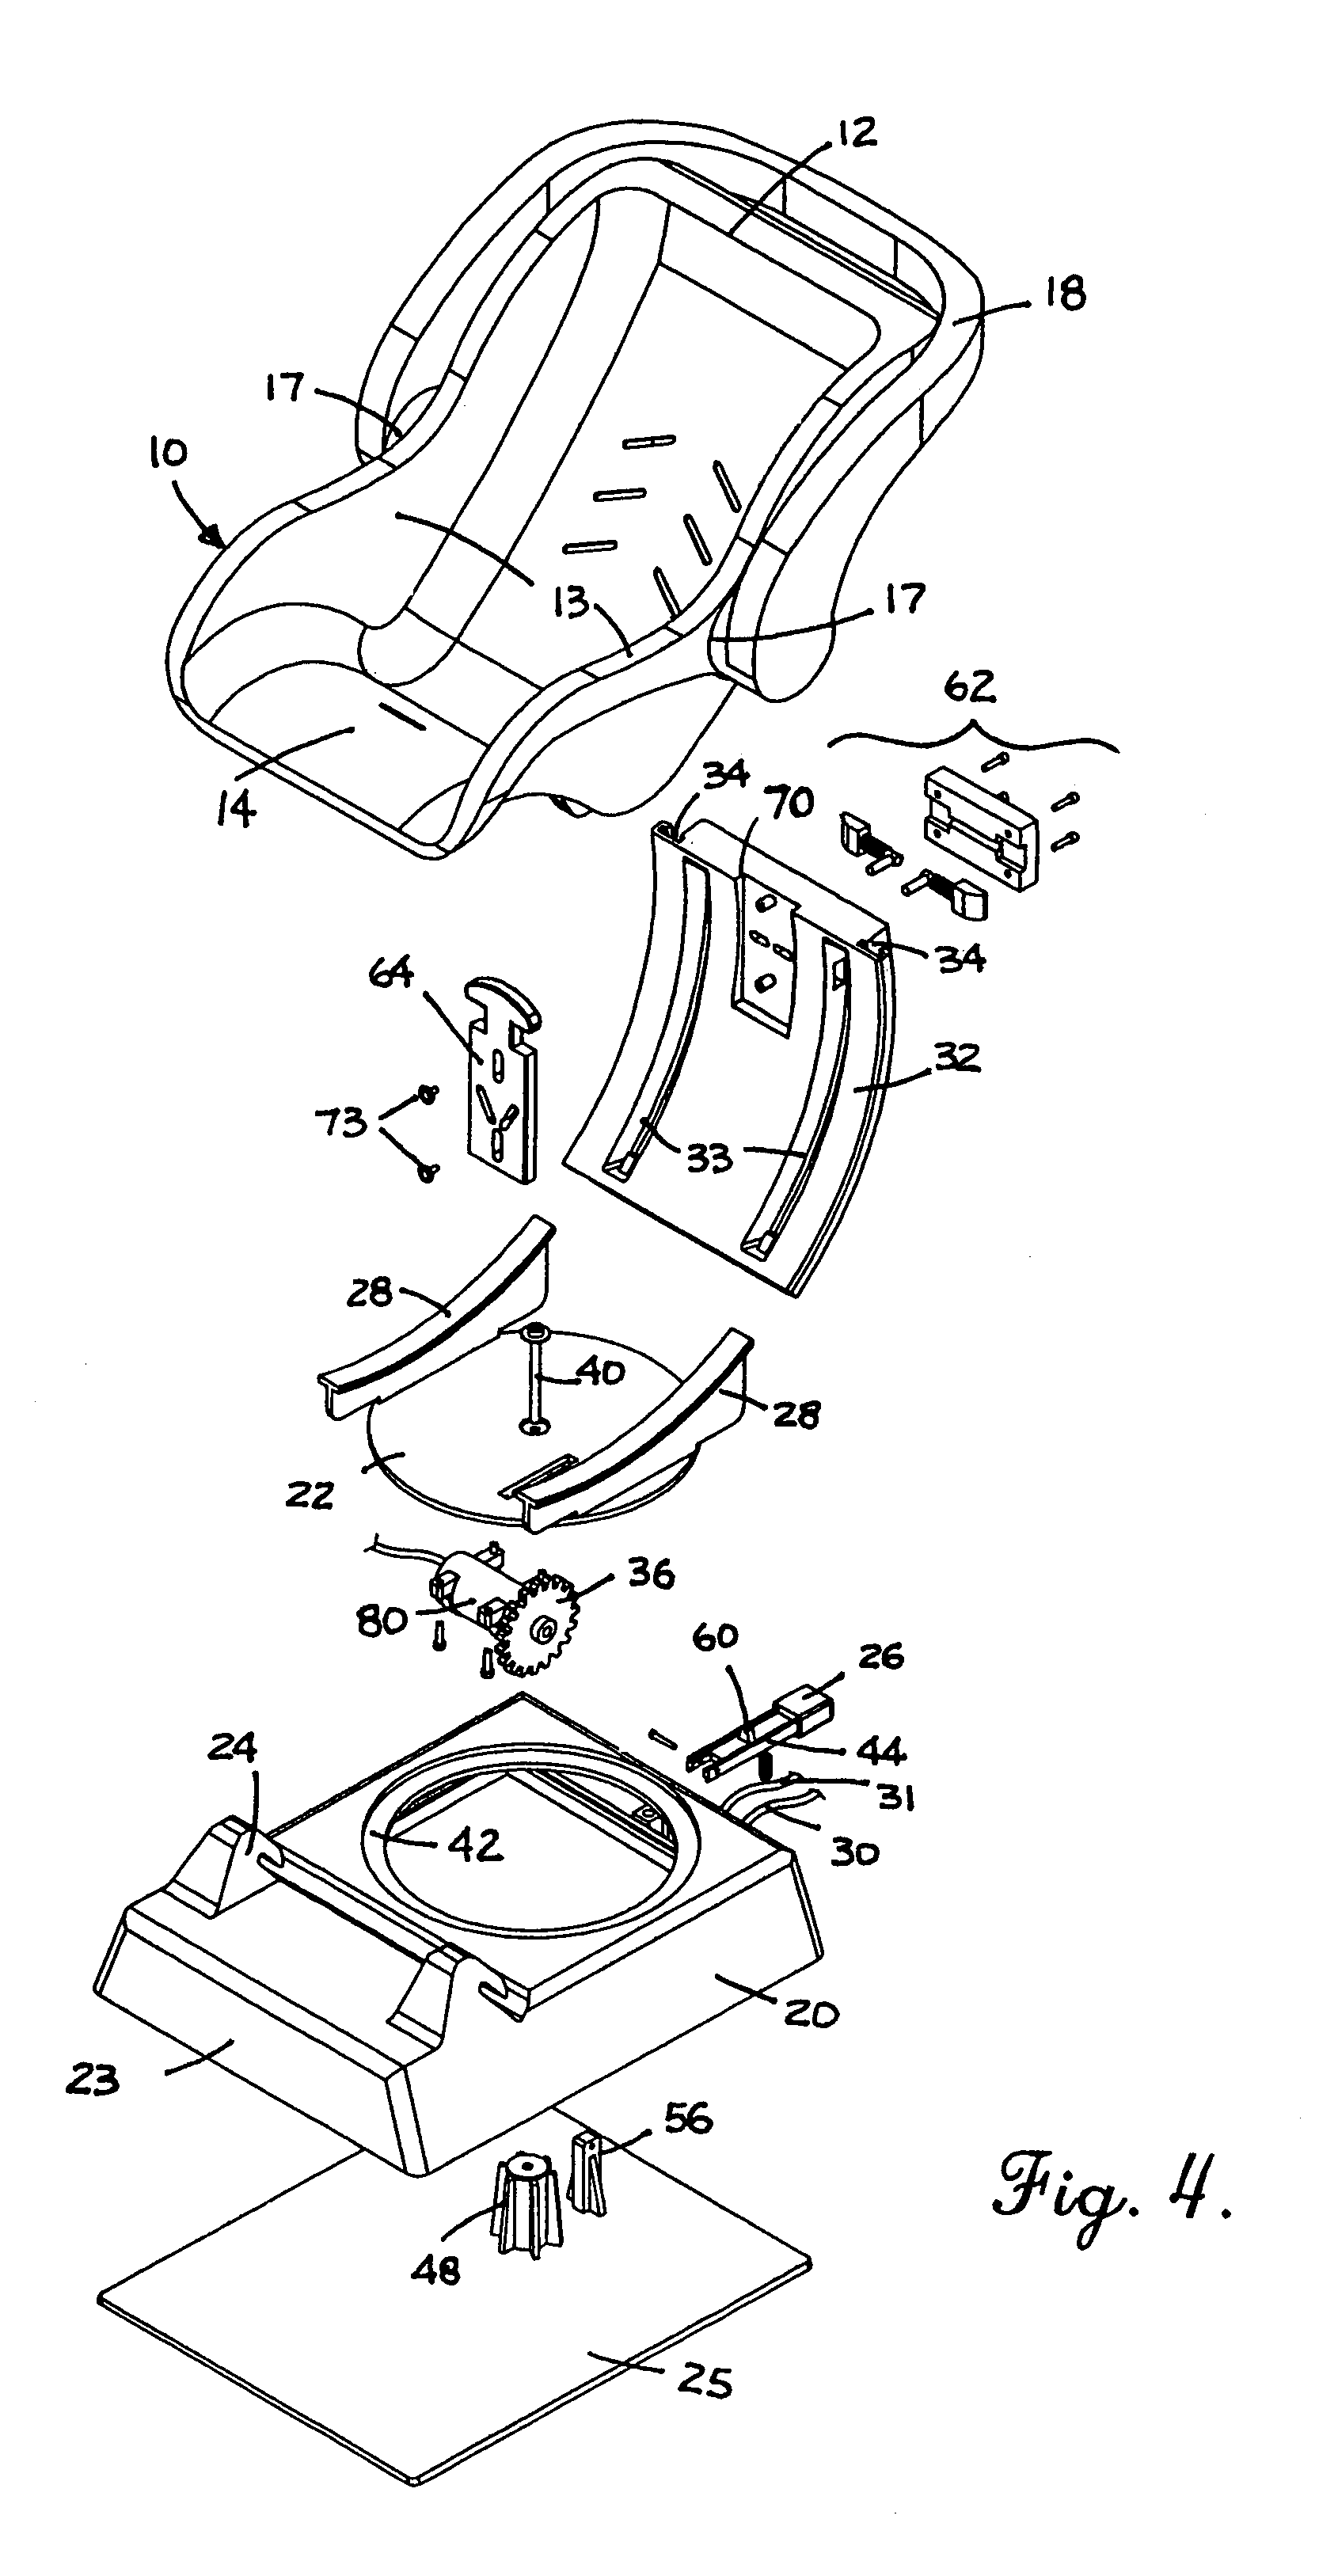 Pivotable child seat for use in a vehicle